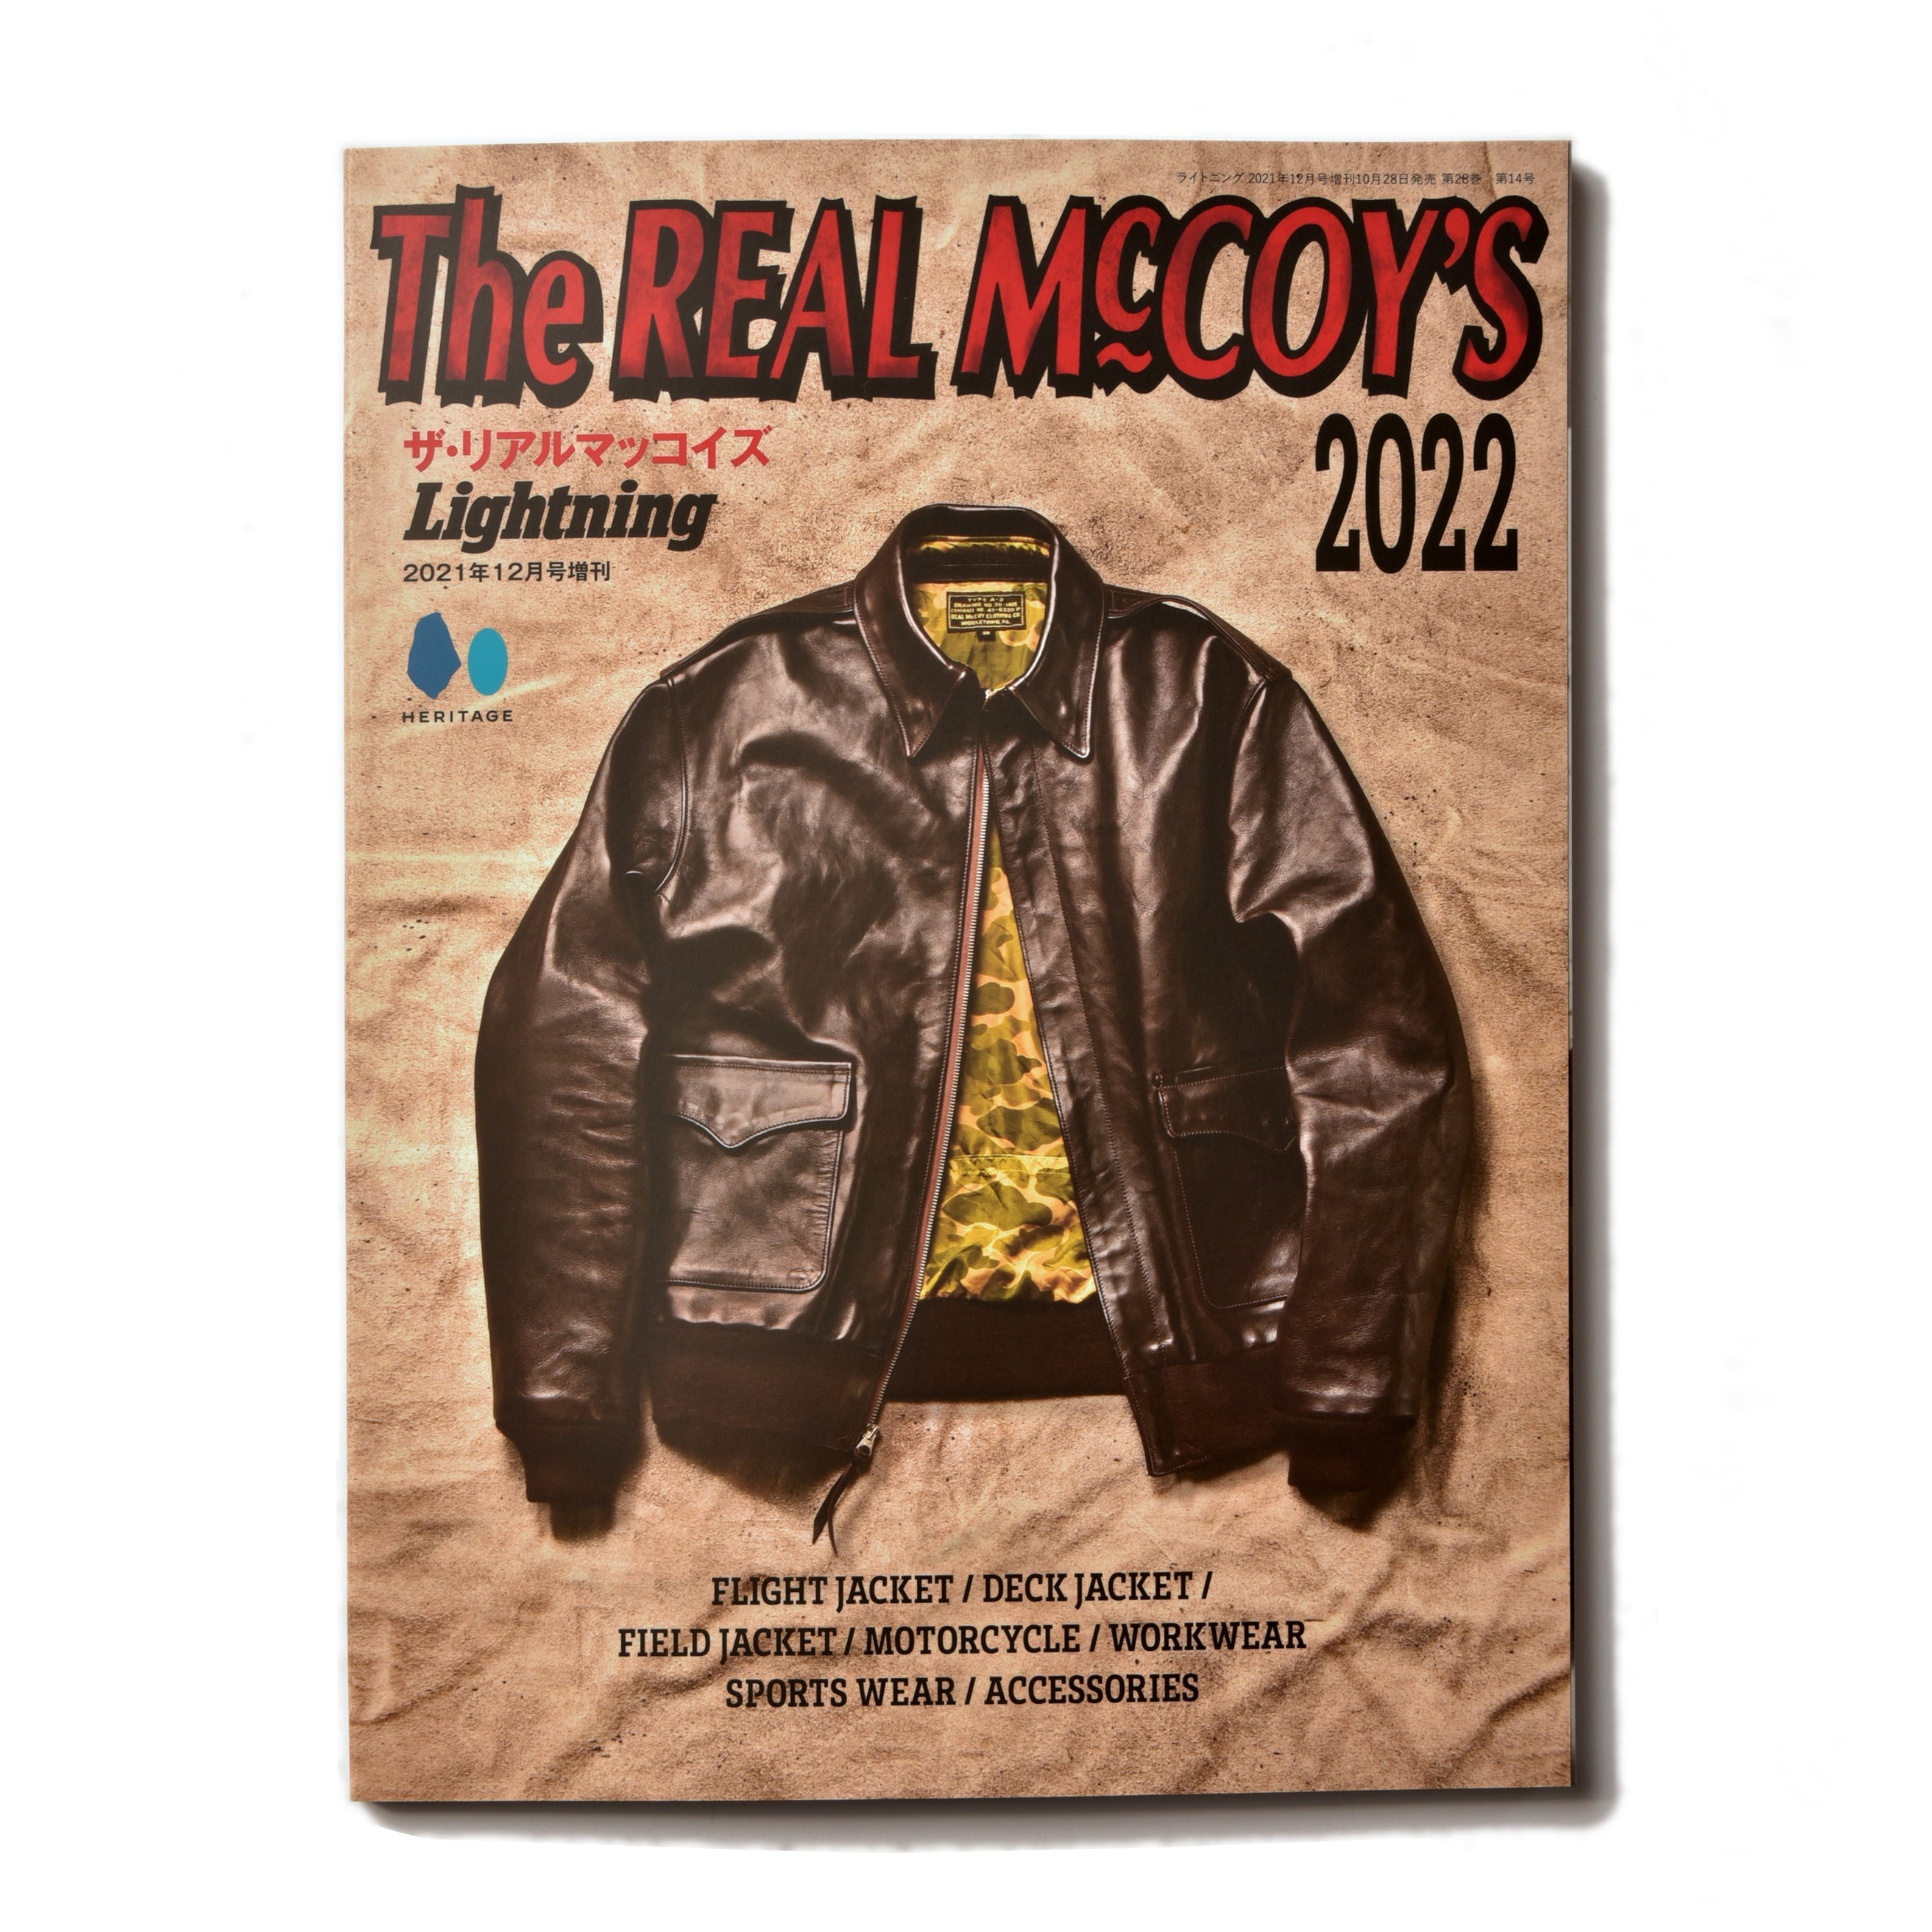 THE REAL McCOY'S BOOK 2022 – The Real McCoy's